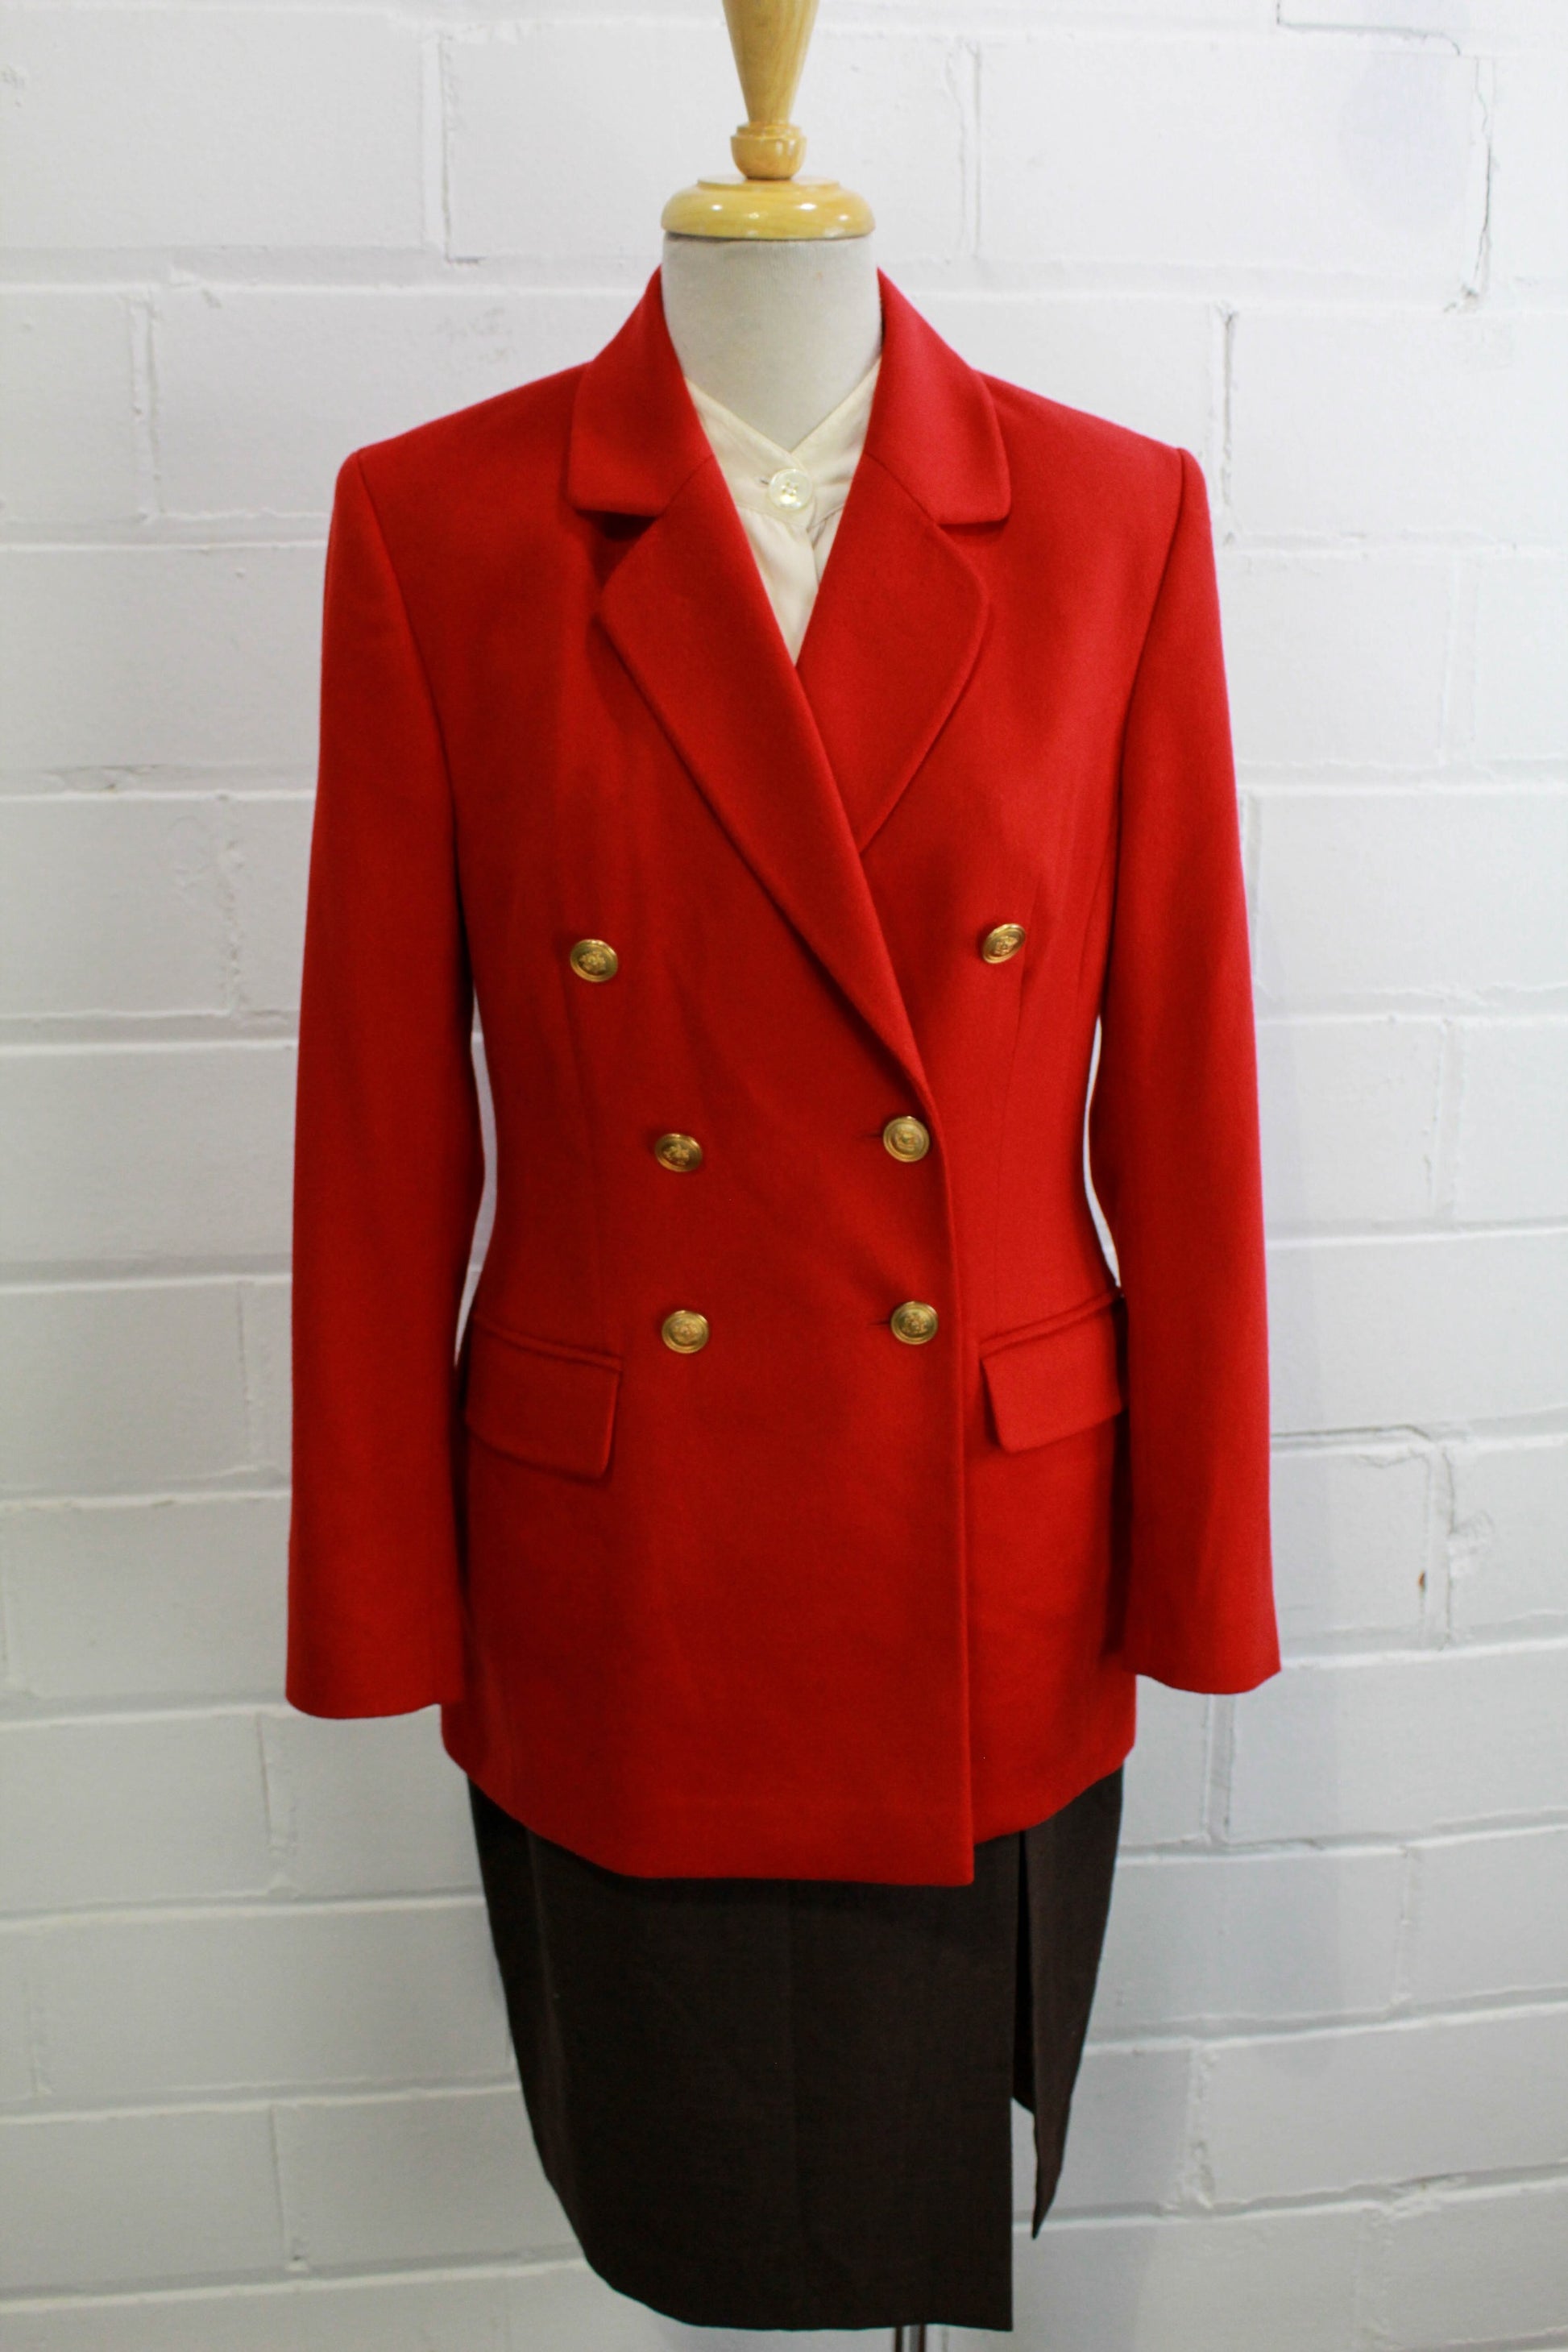 80s Red Wool Angora Blazer with Gold Buttons Front View, PocketsVintage 1980s Bright Red Angora Wool Blazer, Small